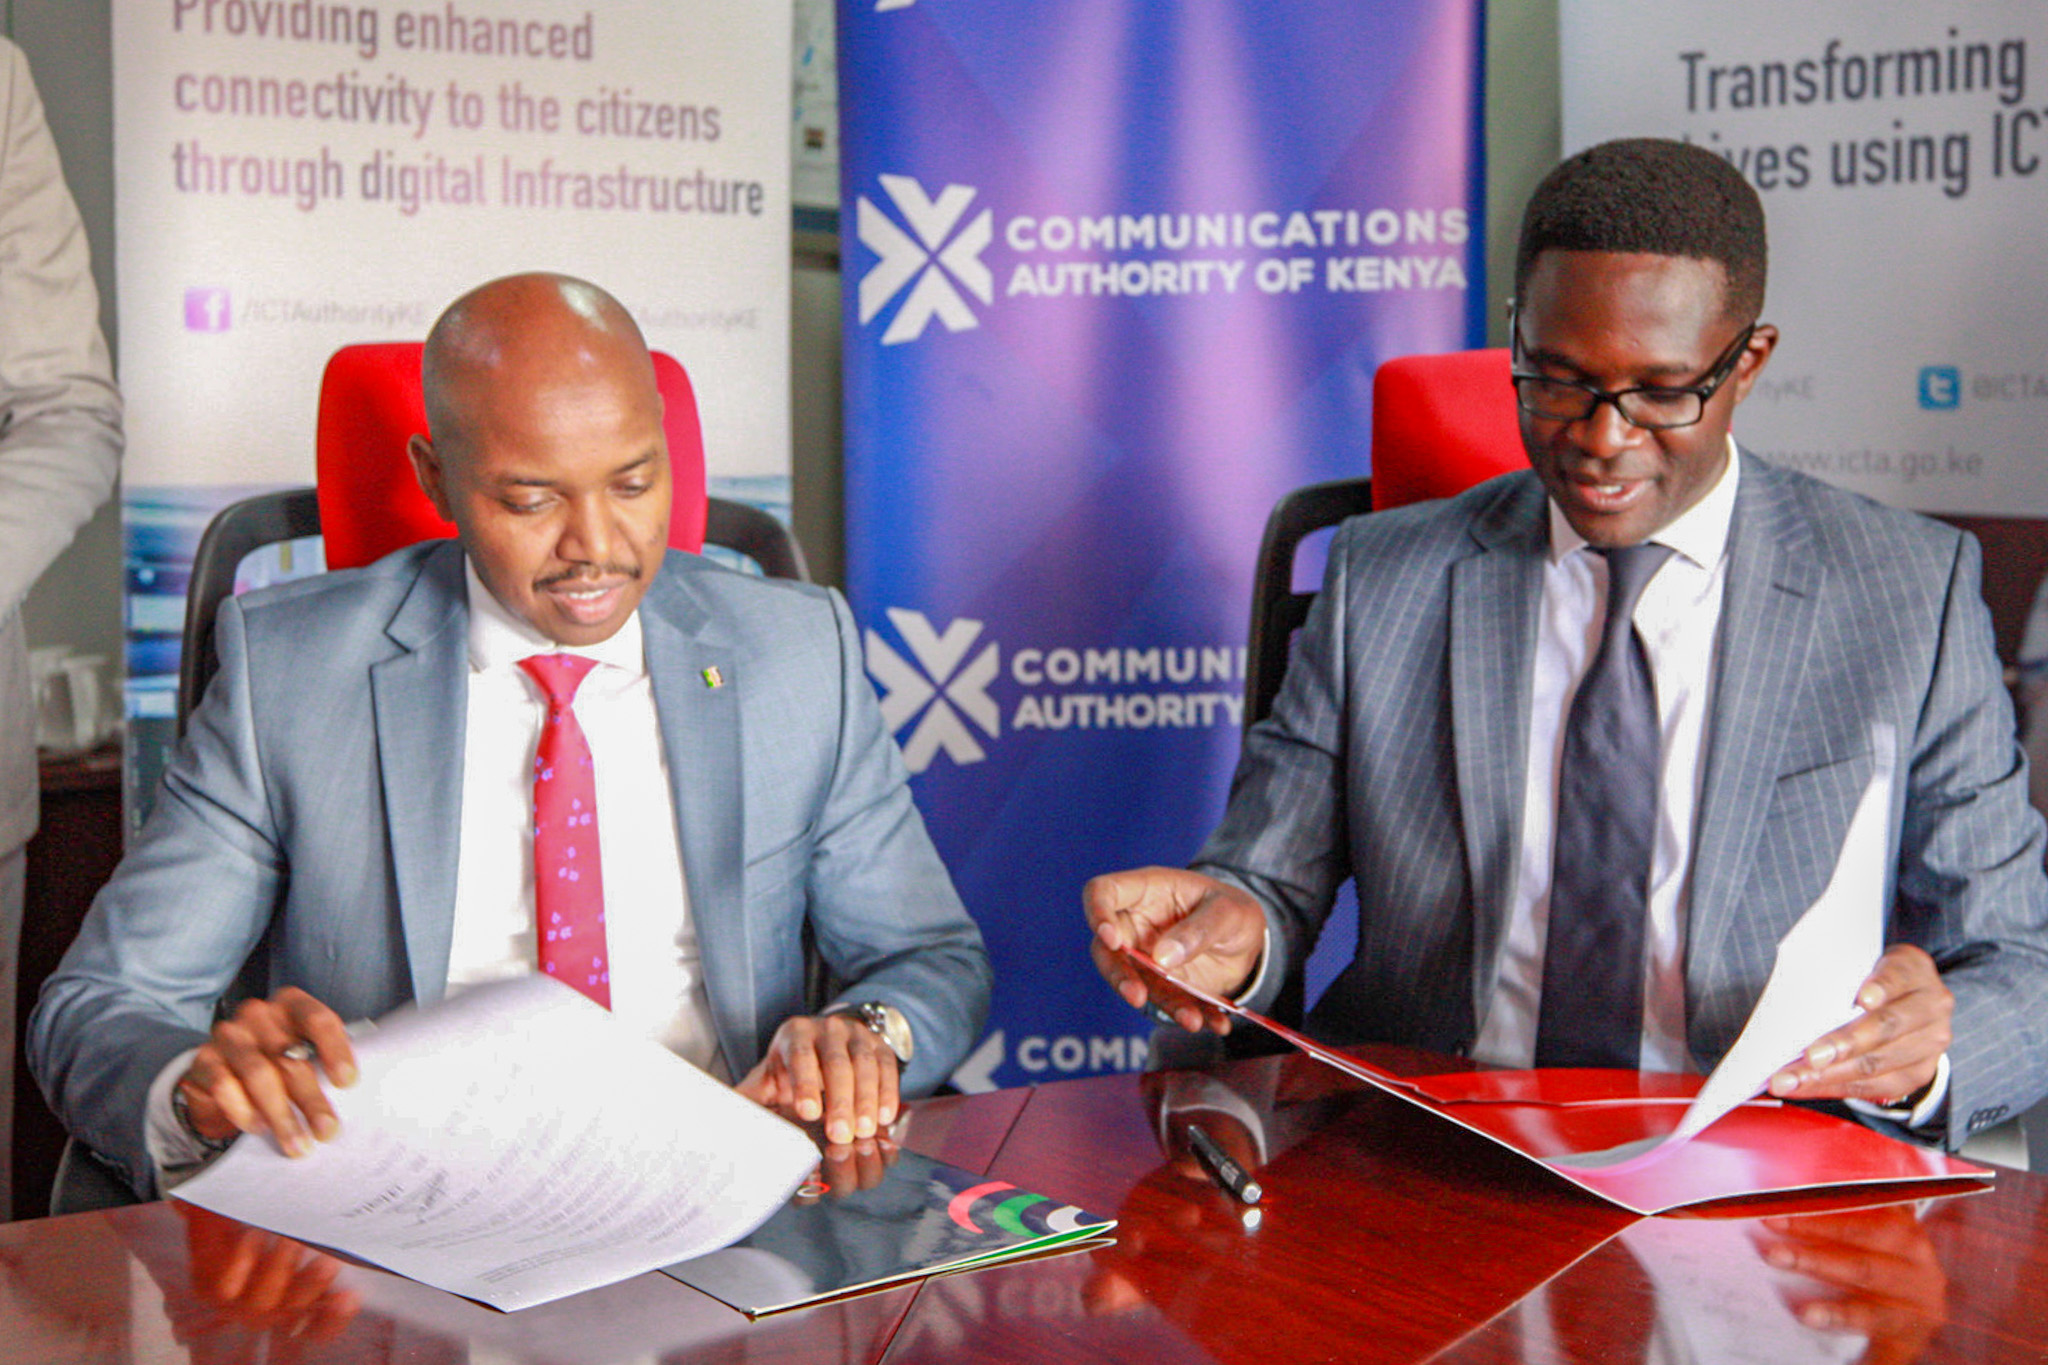 CA and ICTA Sign Agreement For Last Mile Fibre Connectivity To 19 Counties